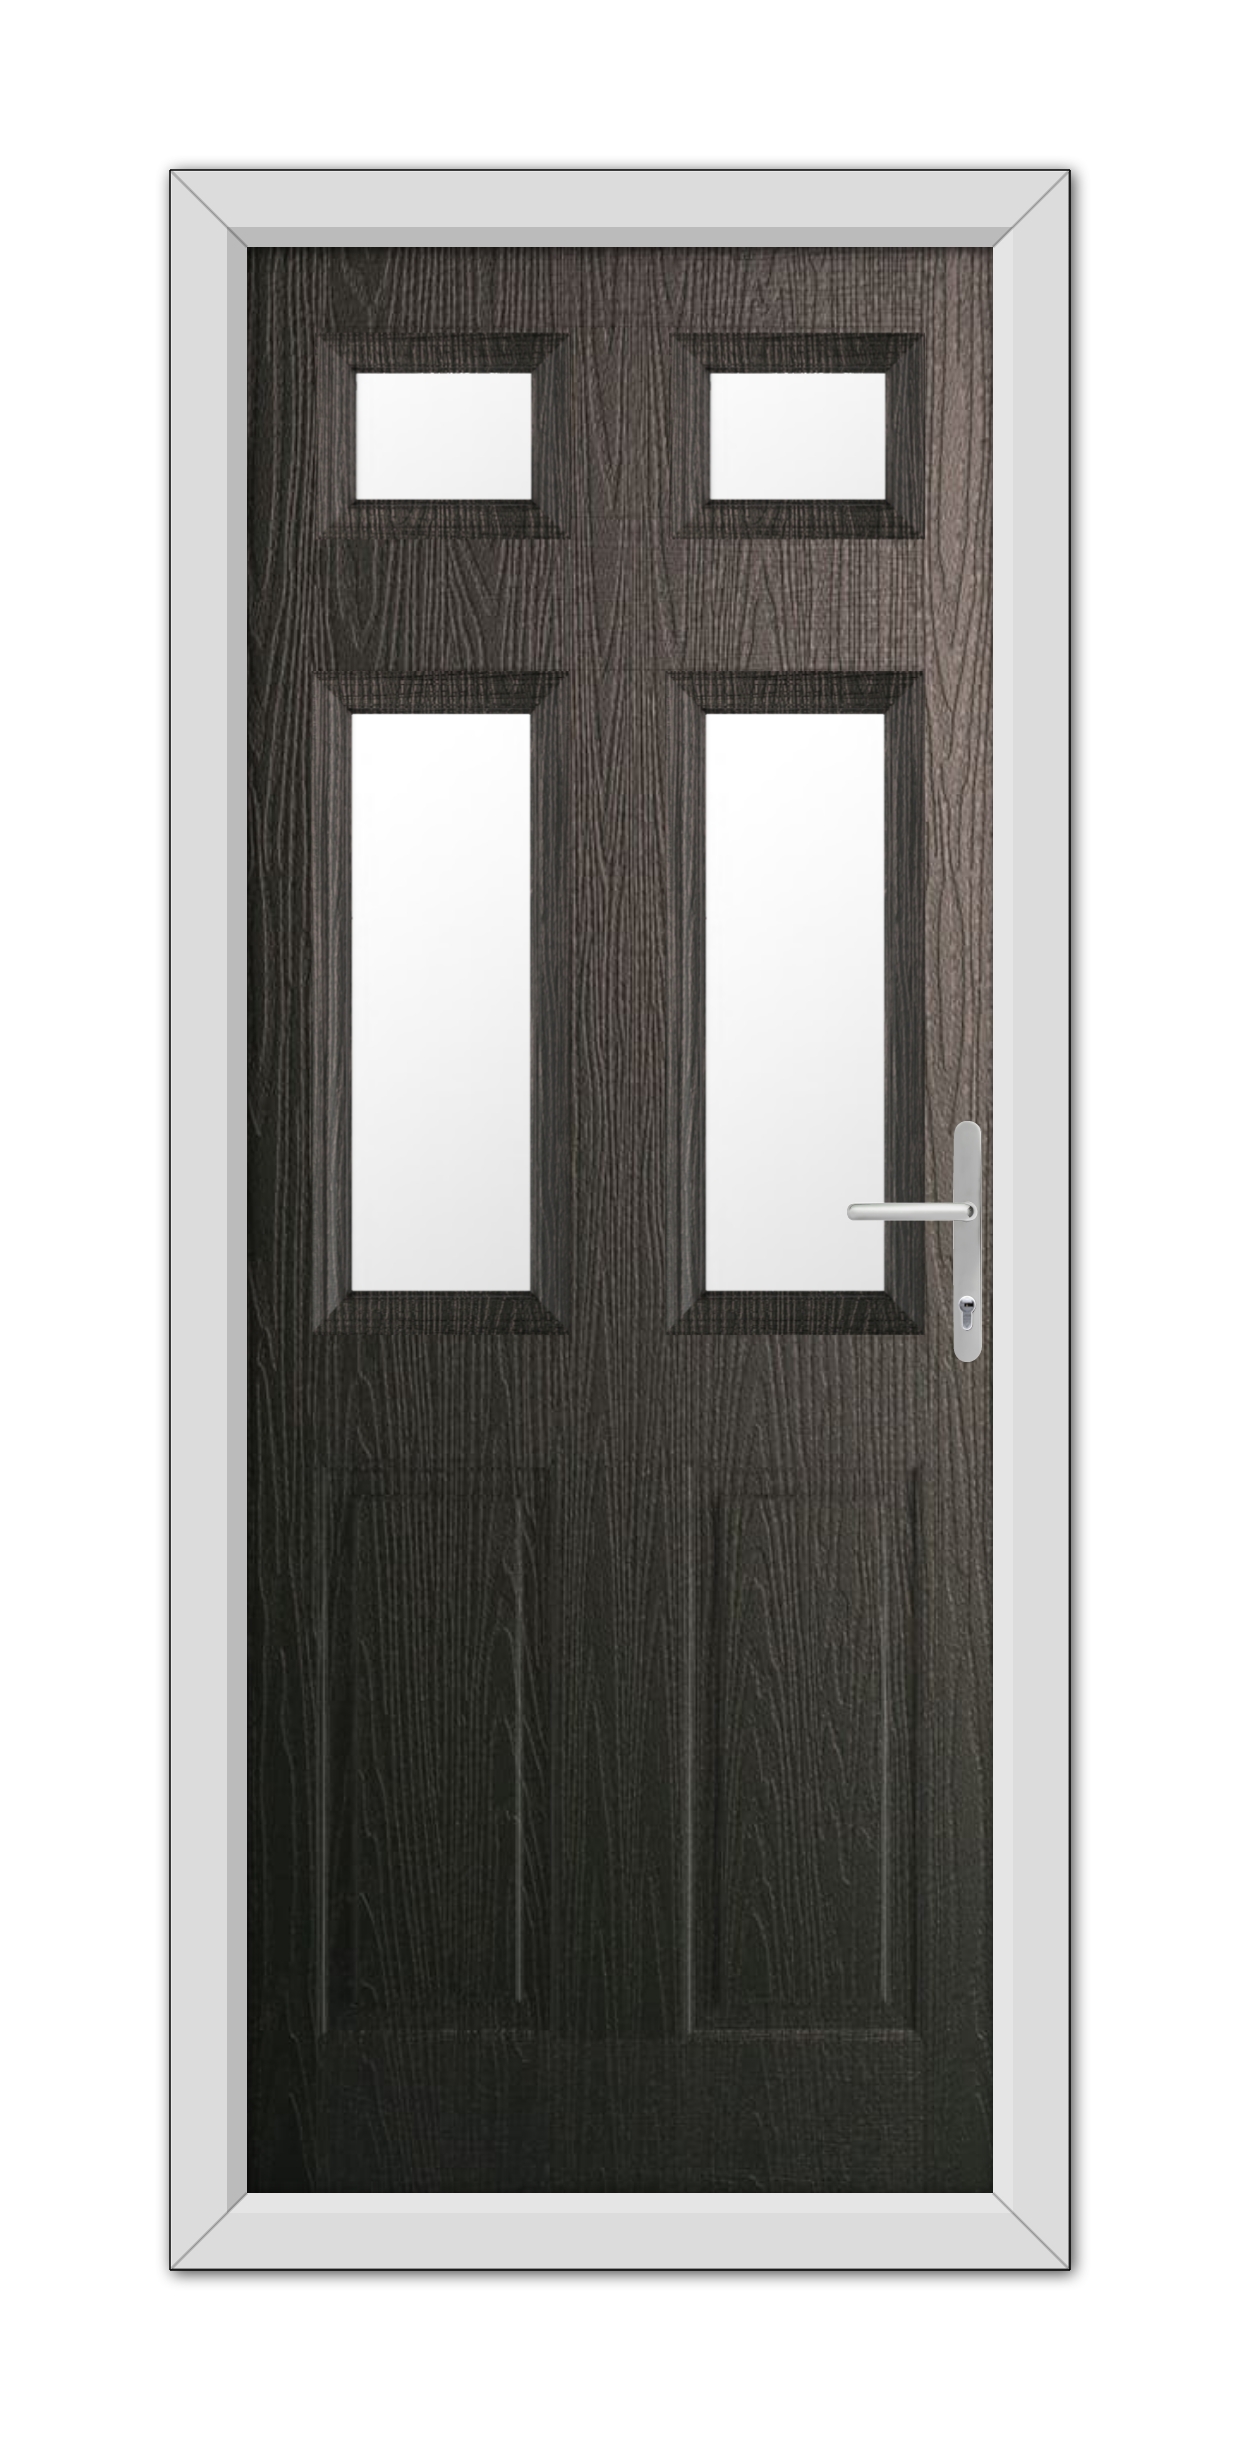 A modern Schwarzbraun Middleton Glazed 4 Composite Door 48mm Timber Core with two vertical rectangular windows and a metallic handle, set within a white frame.